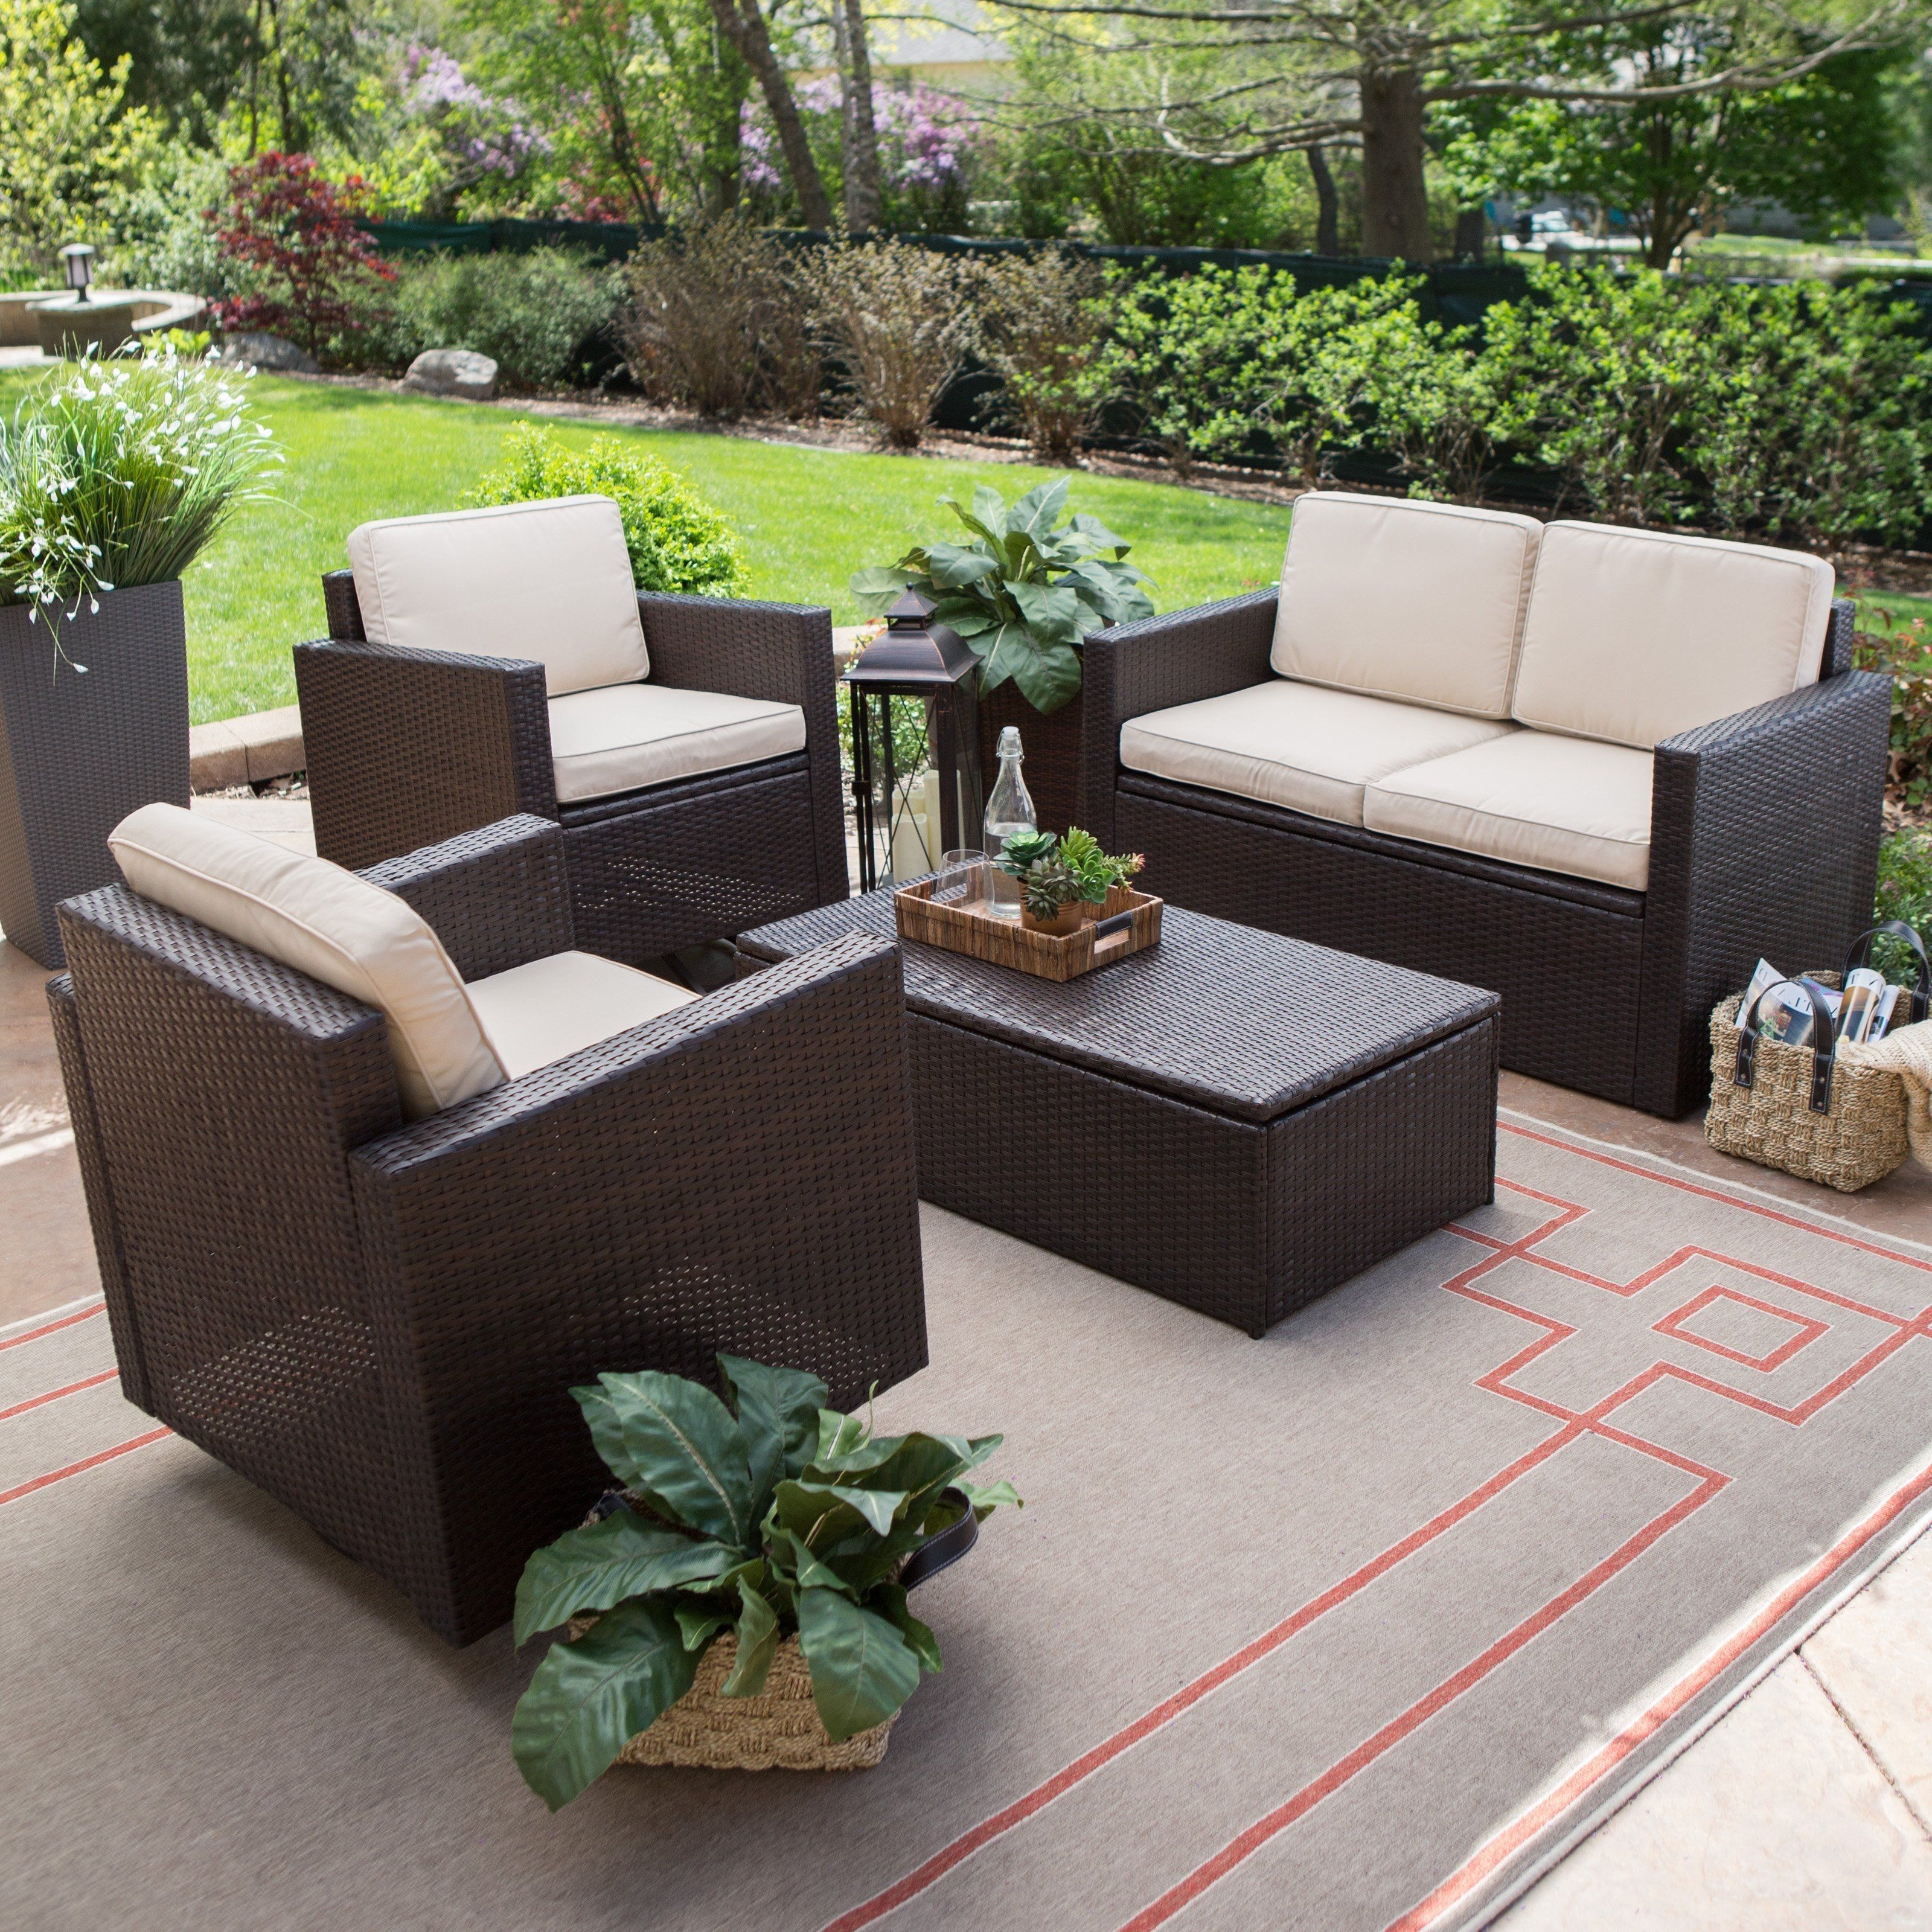 Preferred Hayneedle Patio Conversation Sets Throughout Have To Have It (View 1 of 15)